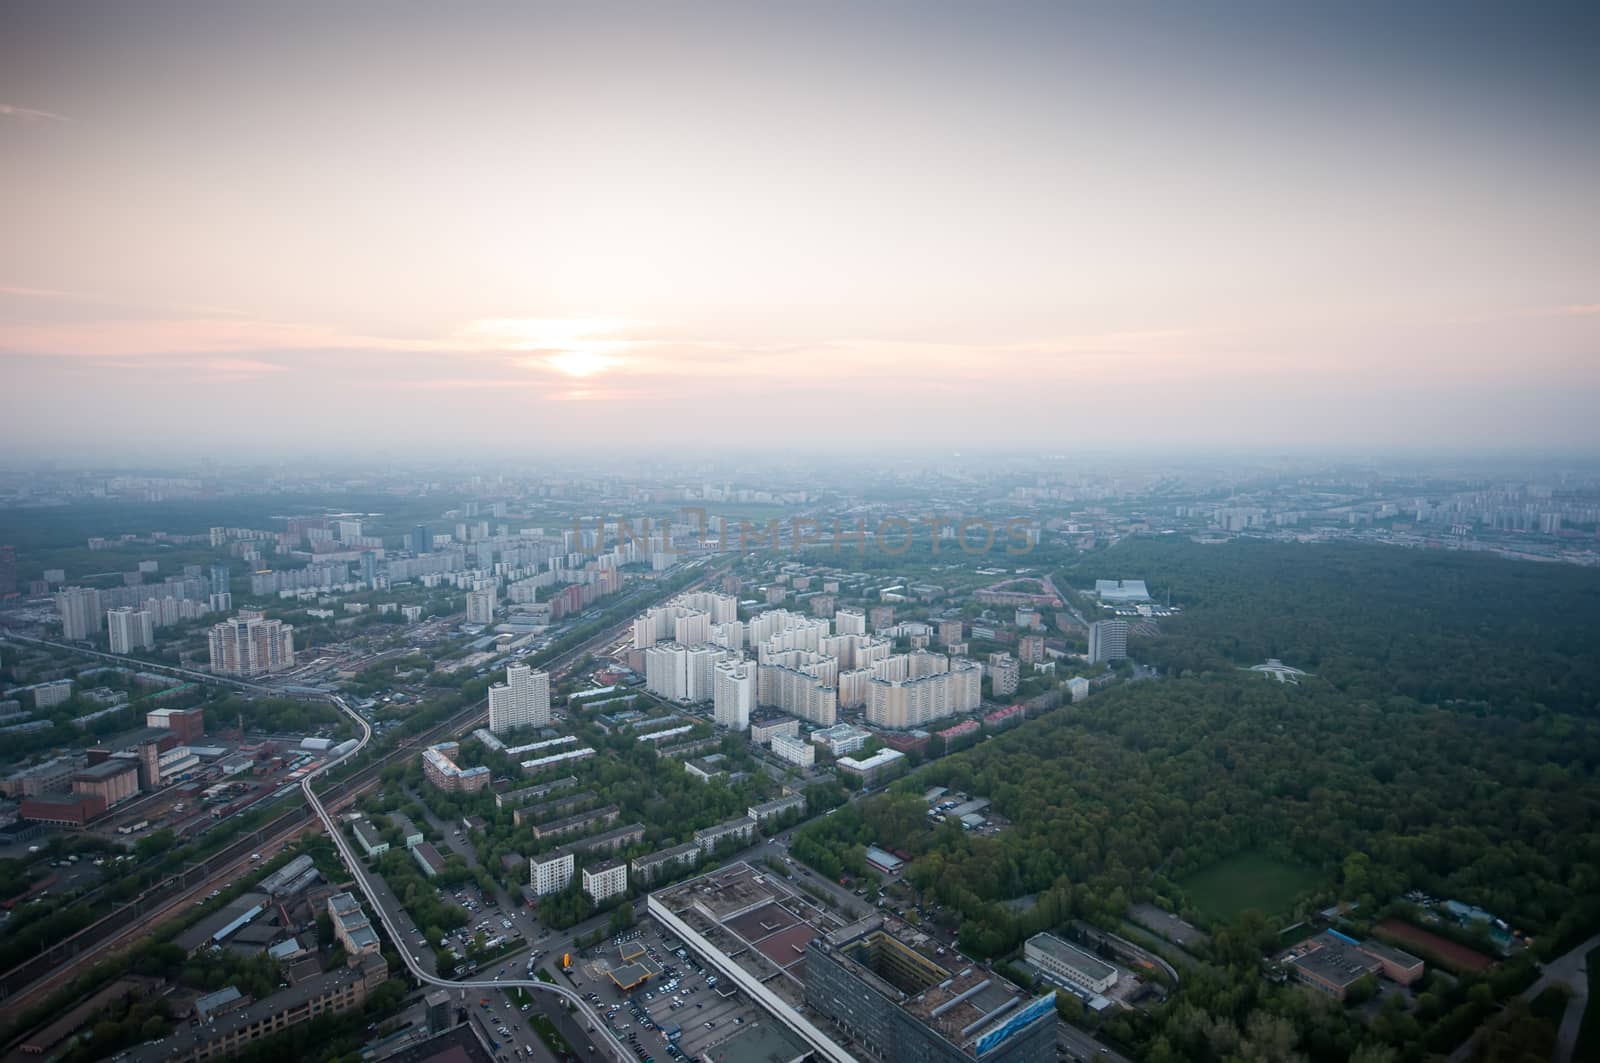 Bird's eye view of Moscow at dawn by vlaru